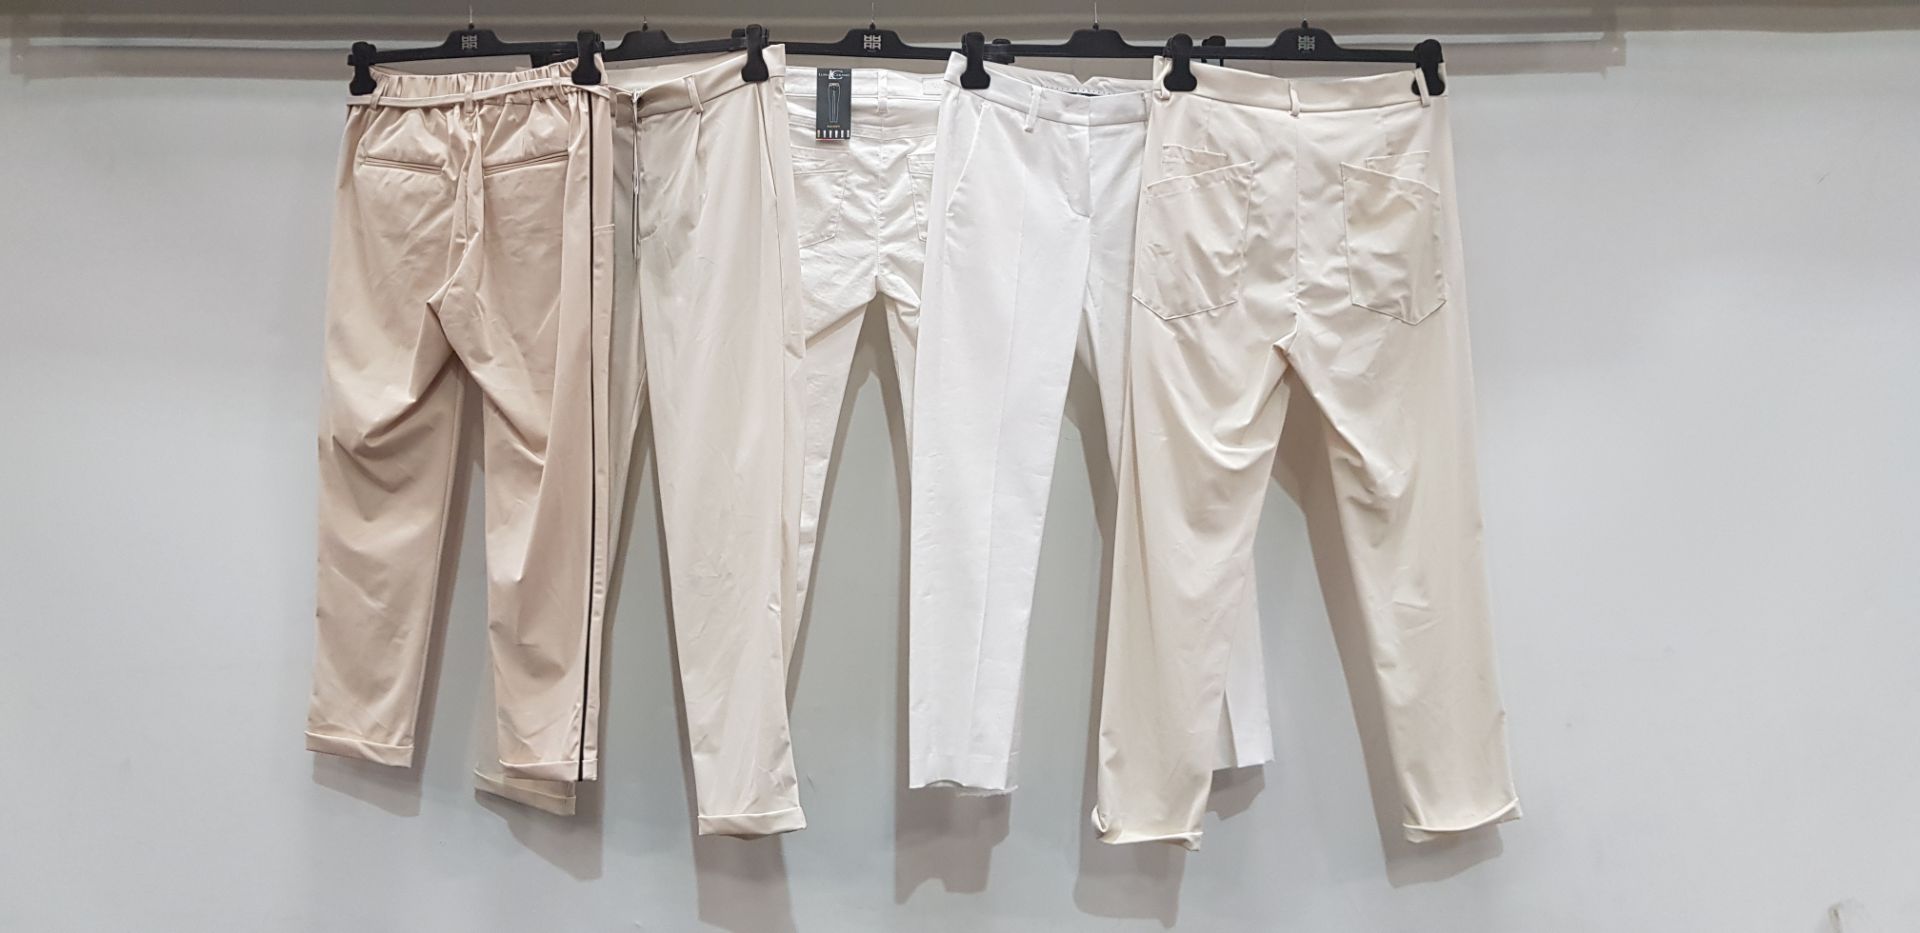 5 PIECE MIXED BRAND NEW PANTS LOT CONTAINING 2 X LOUISA CERANO PANTS AND 3 X JANE LUSHKA PANTS IN